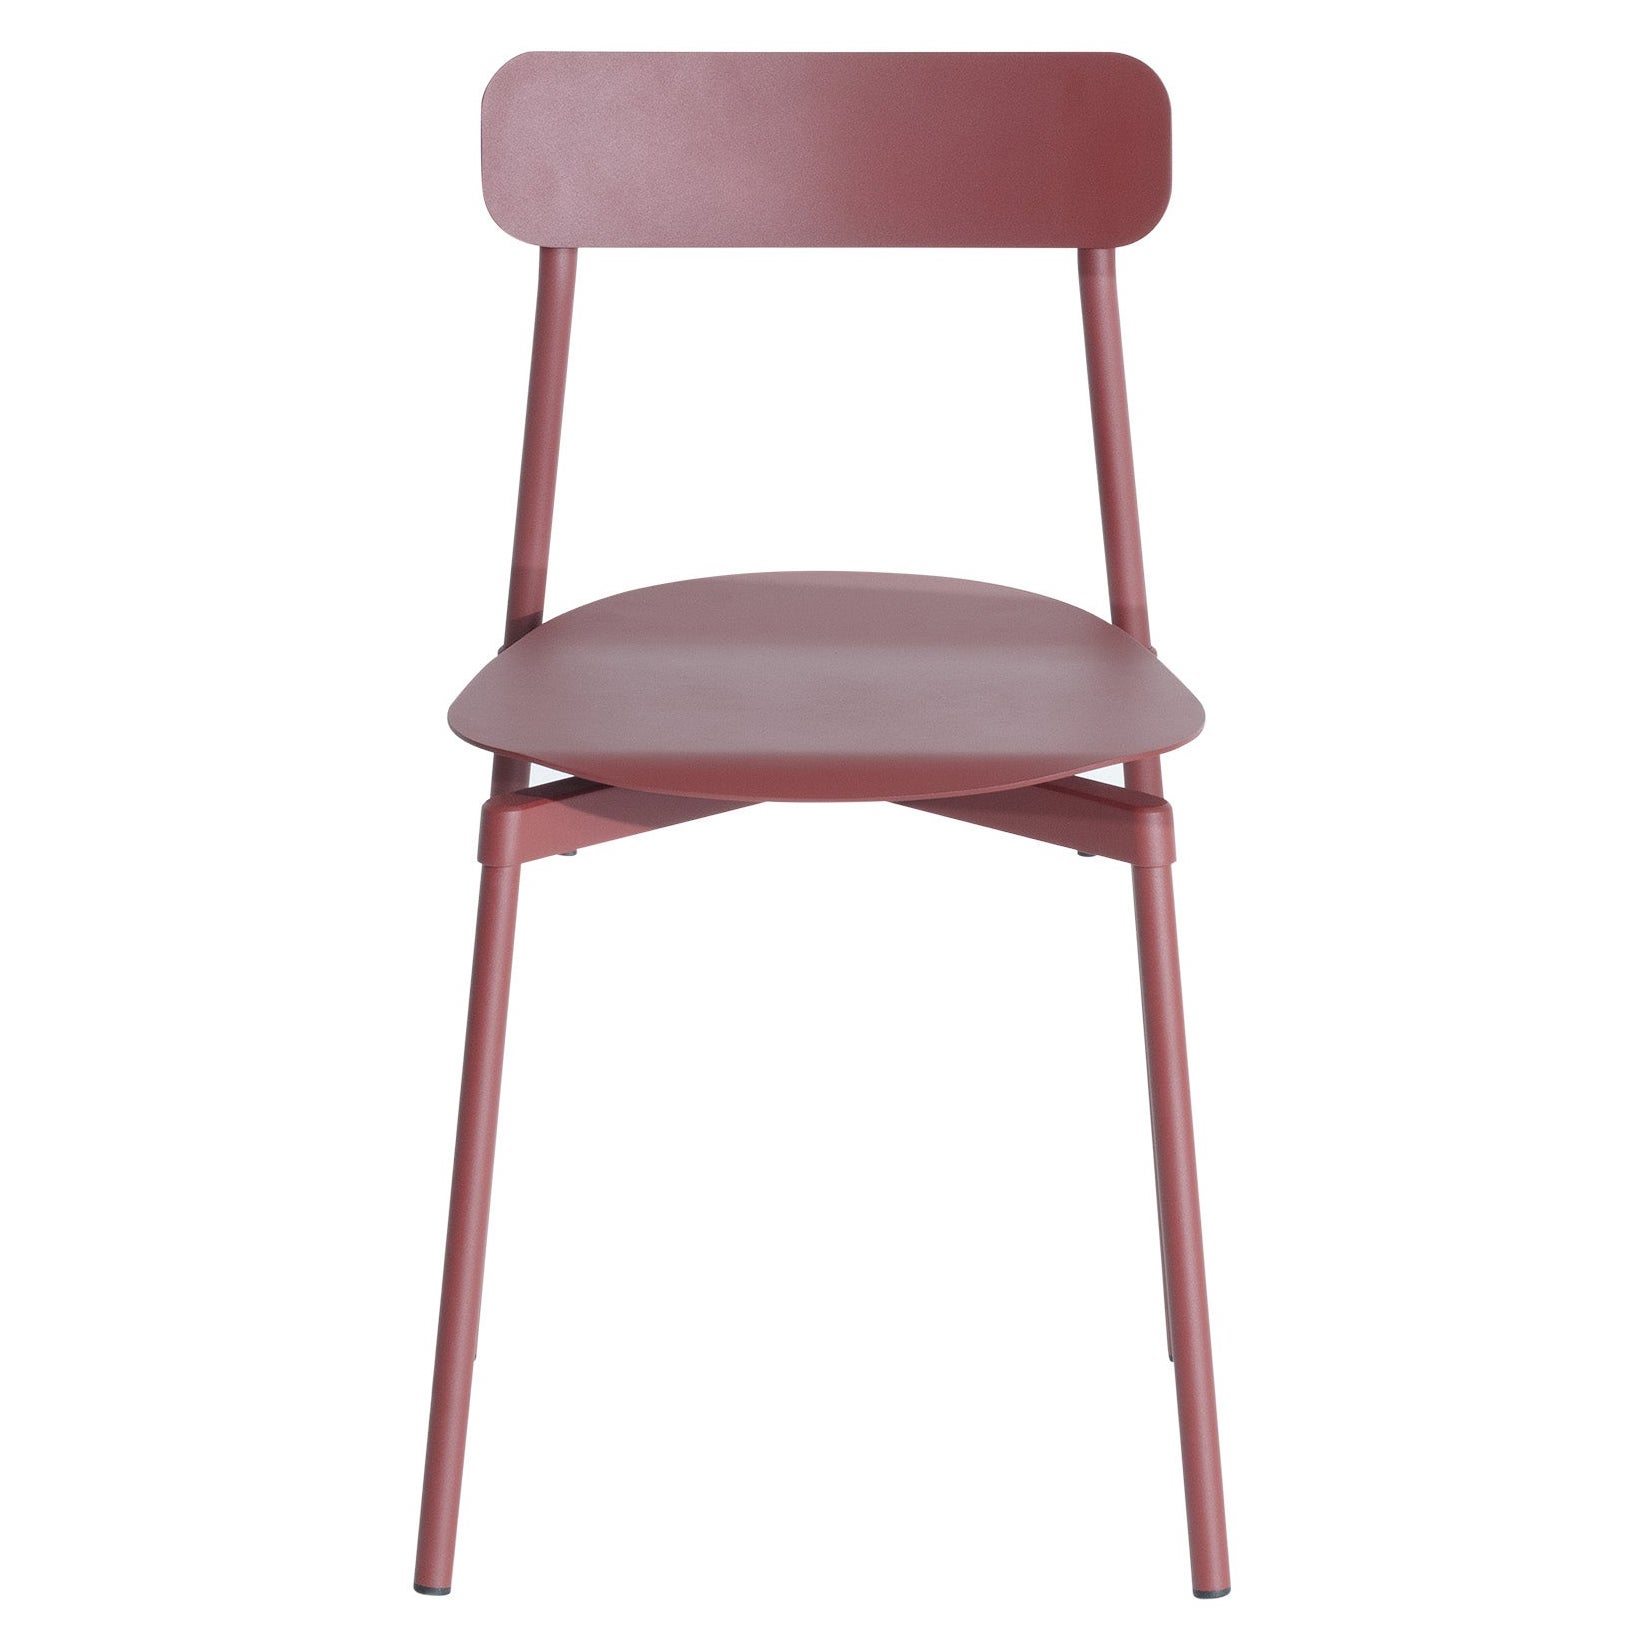 Petite Friture Fromme Chair in Brown-Red Aluminium by Tom Chung, 2019 For Sale